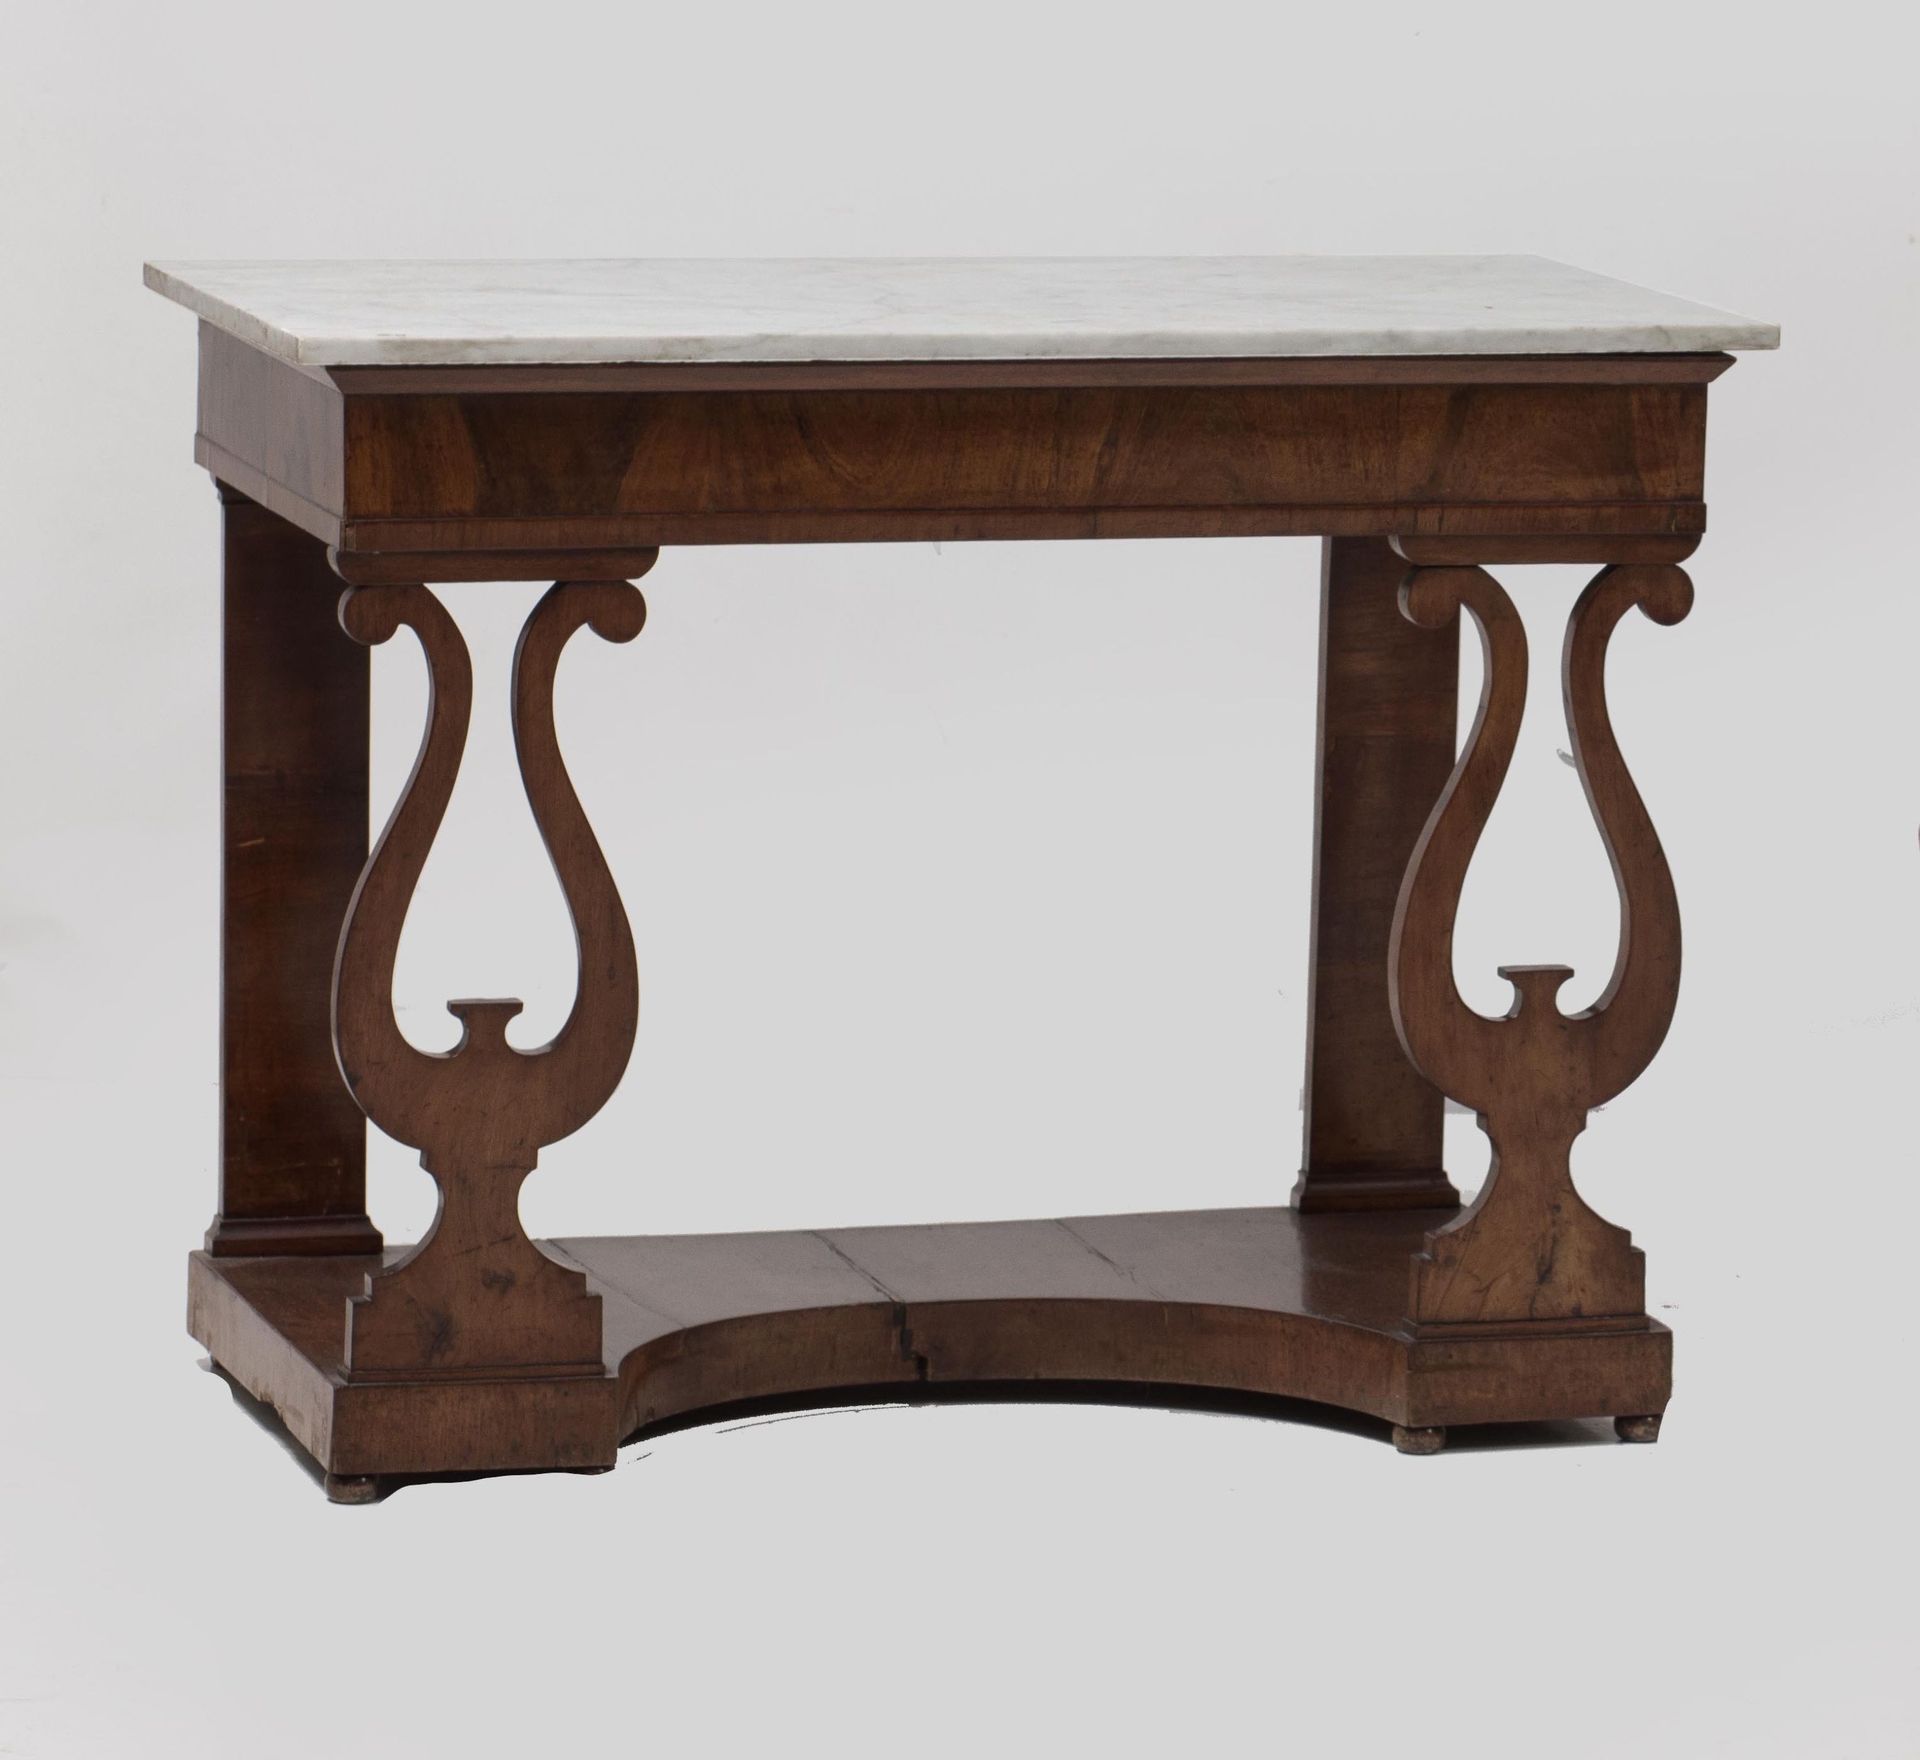 Fernandina mahogany console, Spain, med. S XIX. With replaced white marble top a&hellip;